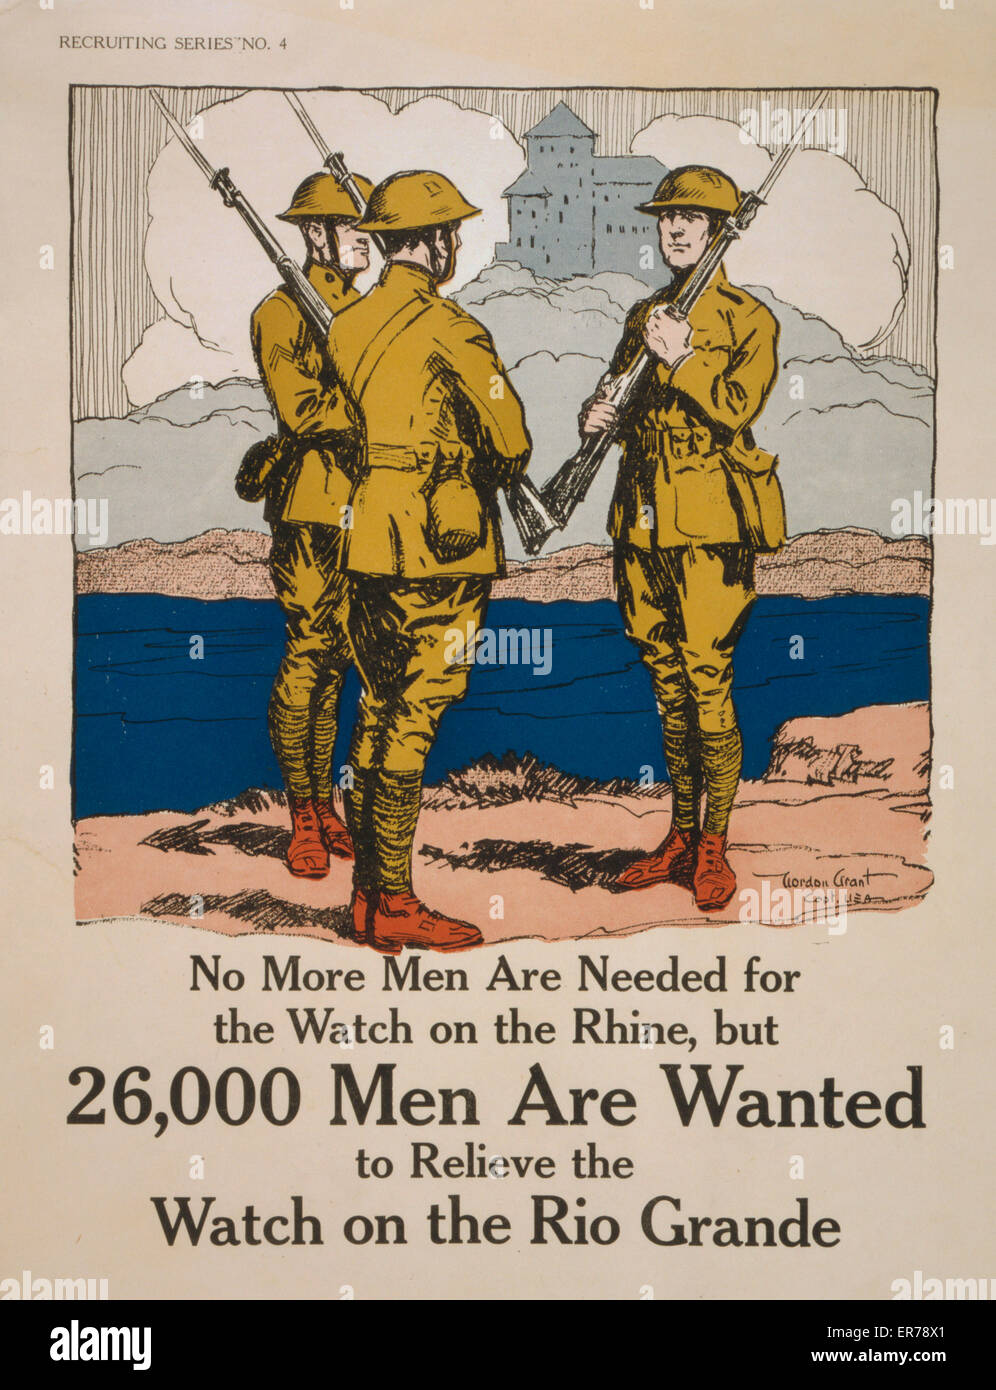 No more men are needed for the watch on the Rhine, but 26,000 men are wanted to relieve the watch on the Rio Grande. Poster showing soldiers with bayonets in a river landscape. Date 1917. Stock Photo